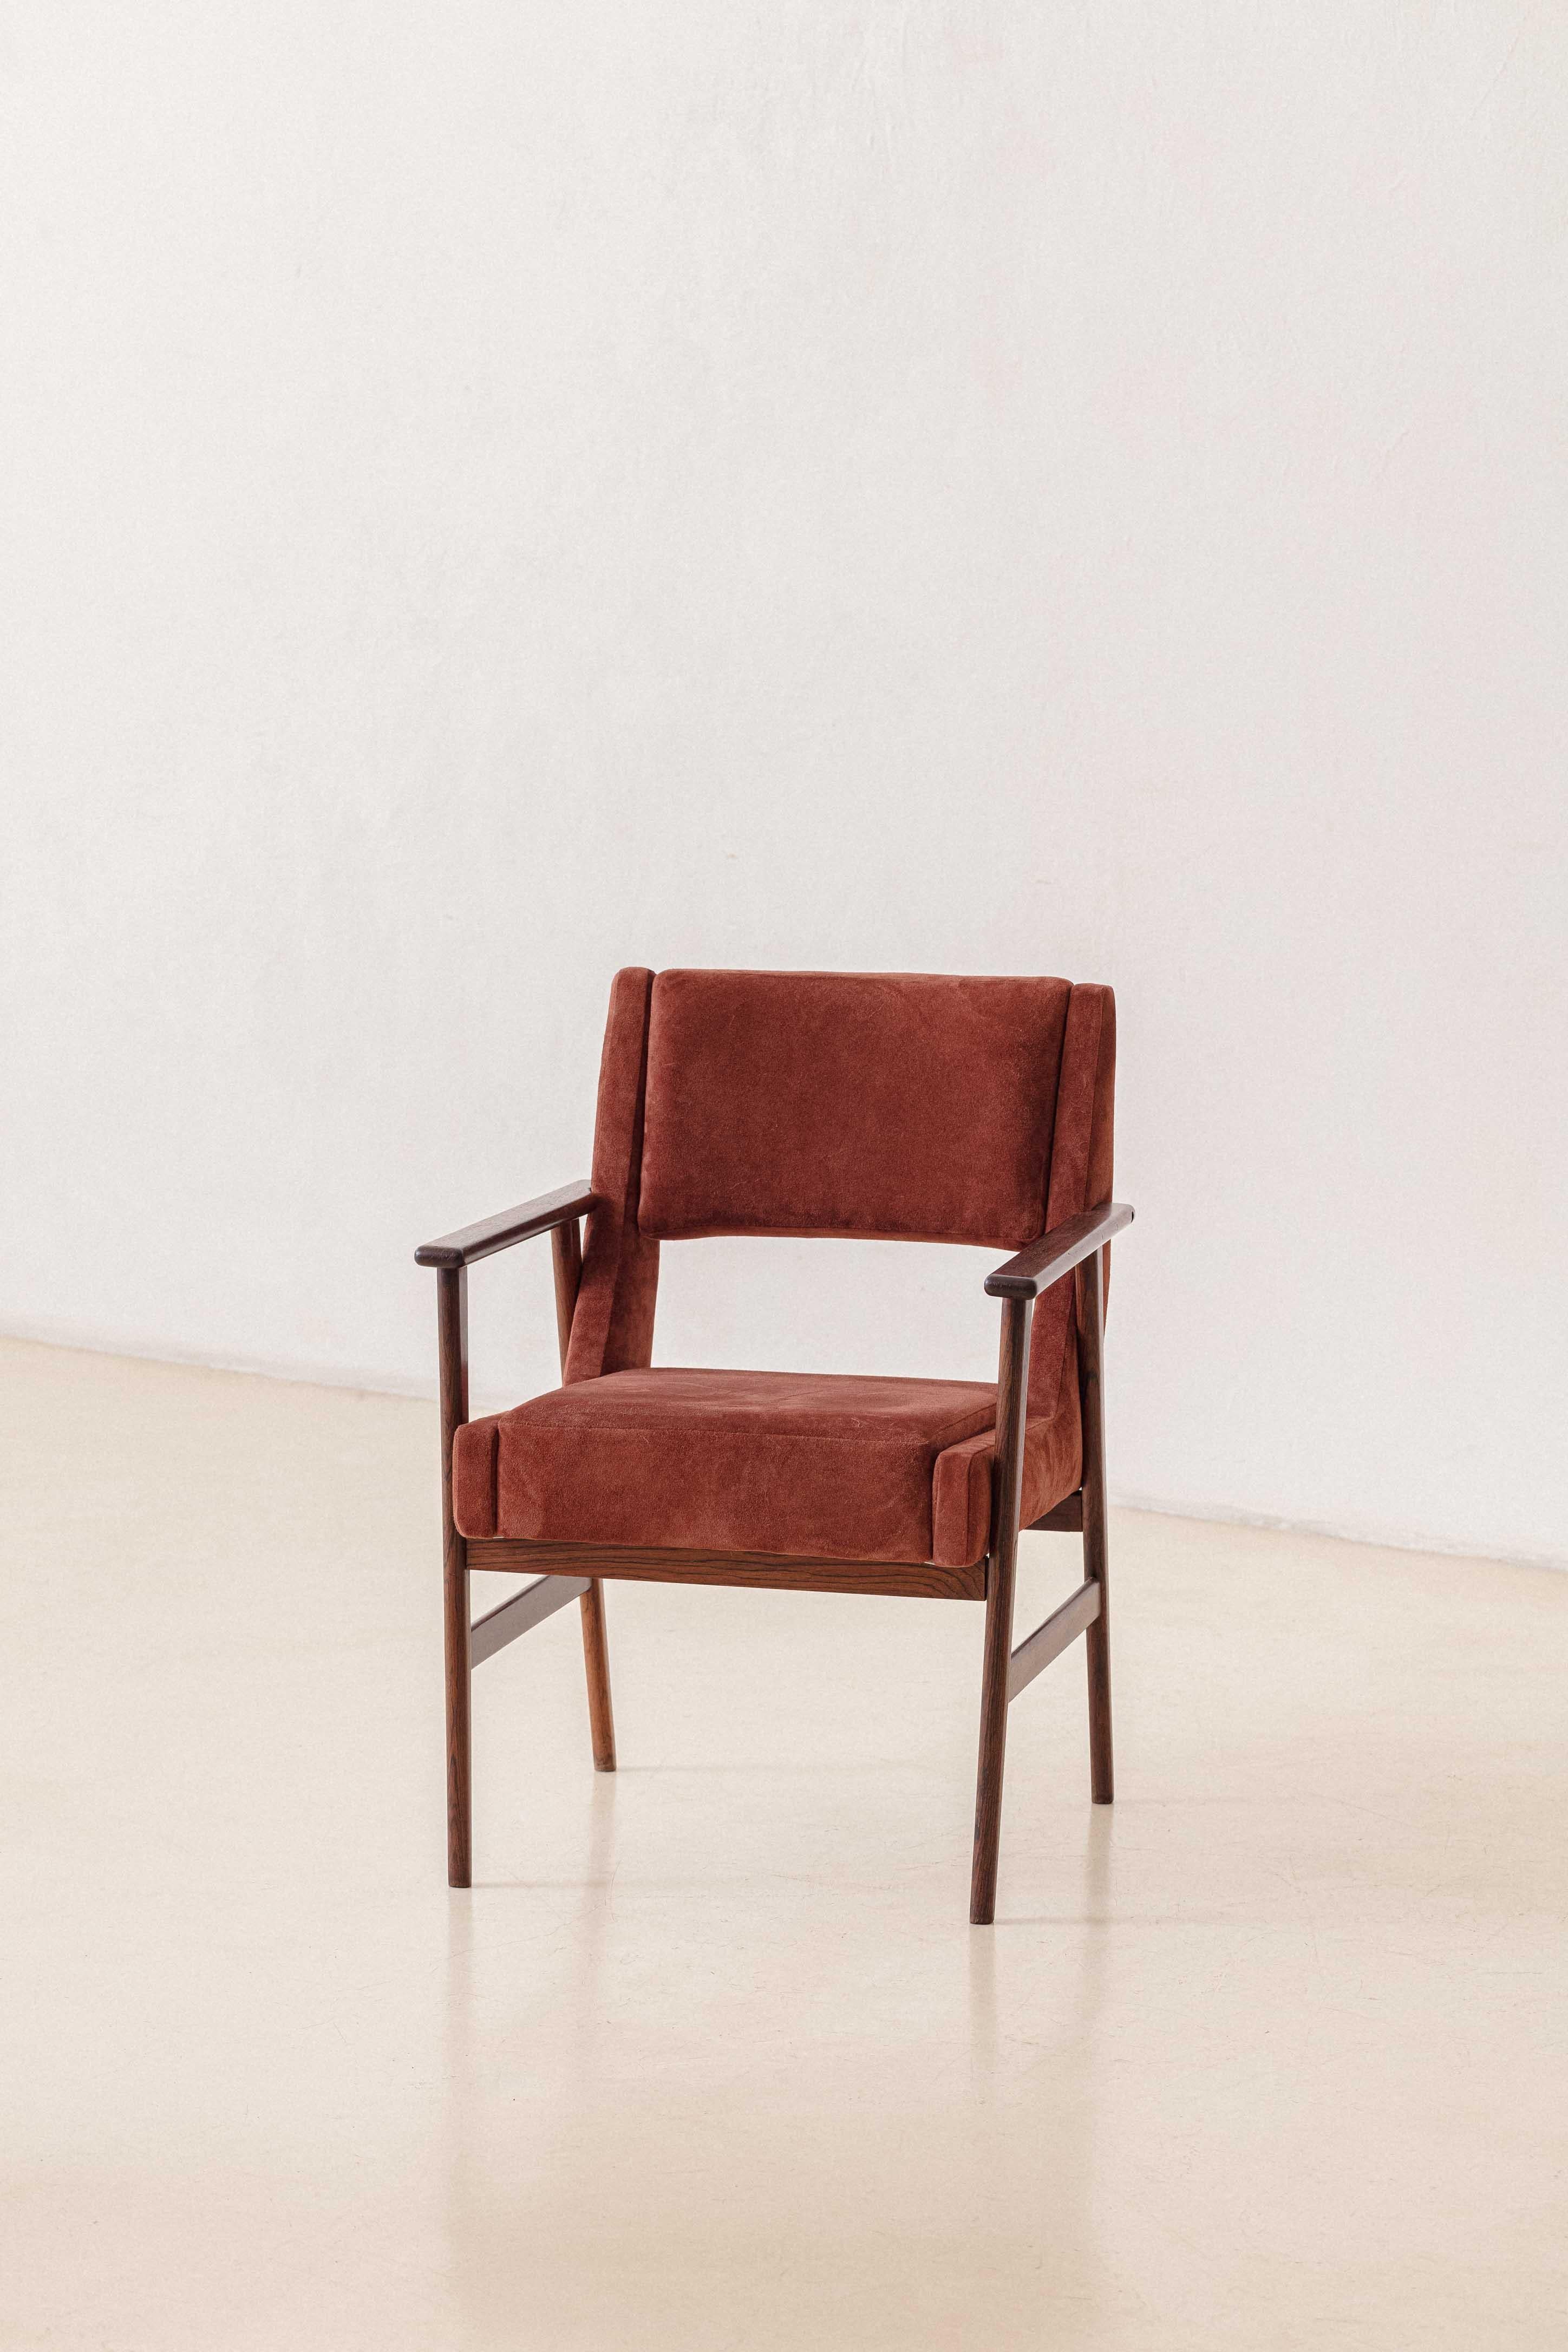 This chair with armrests was produced by Cantù Móveis e Interiores Ltda. in the 1960s and presented in the company catalog from this period. With a structure in solid Rosewood, the piece received new upholstery in gorgeous red leather.

Architects